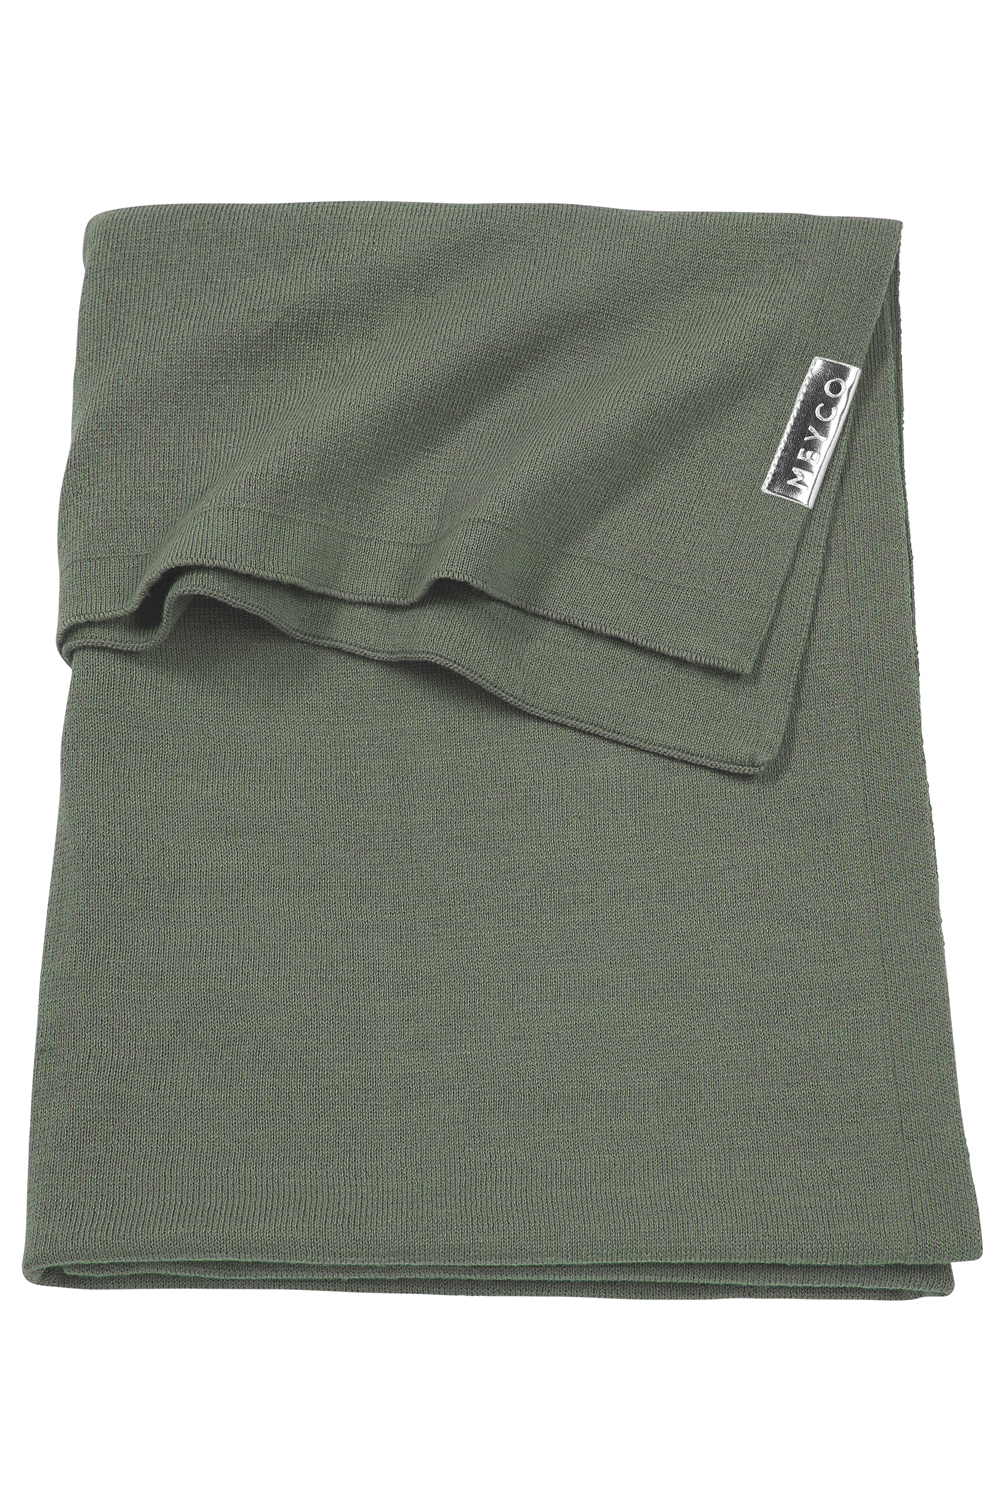 Cot bed blanket Knit Basic - forest green - 100x150cm